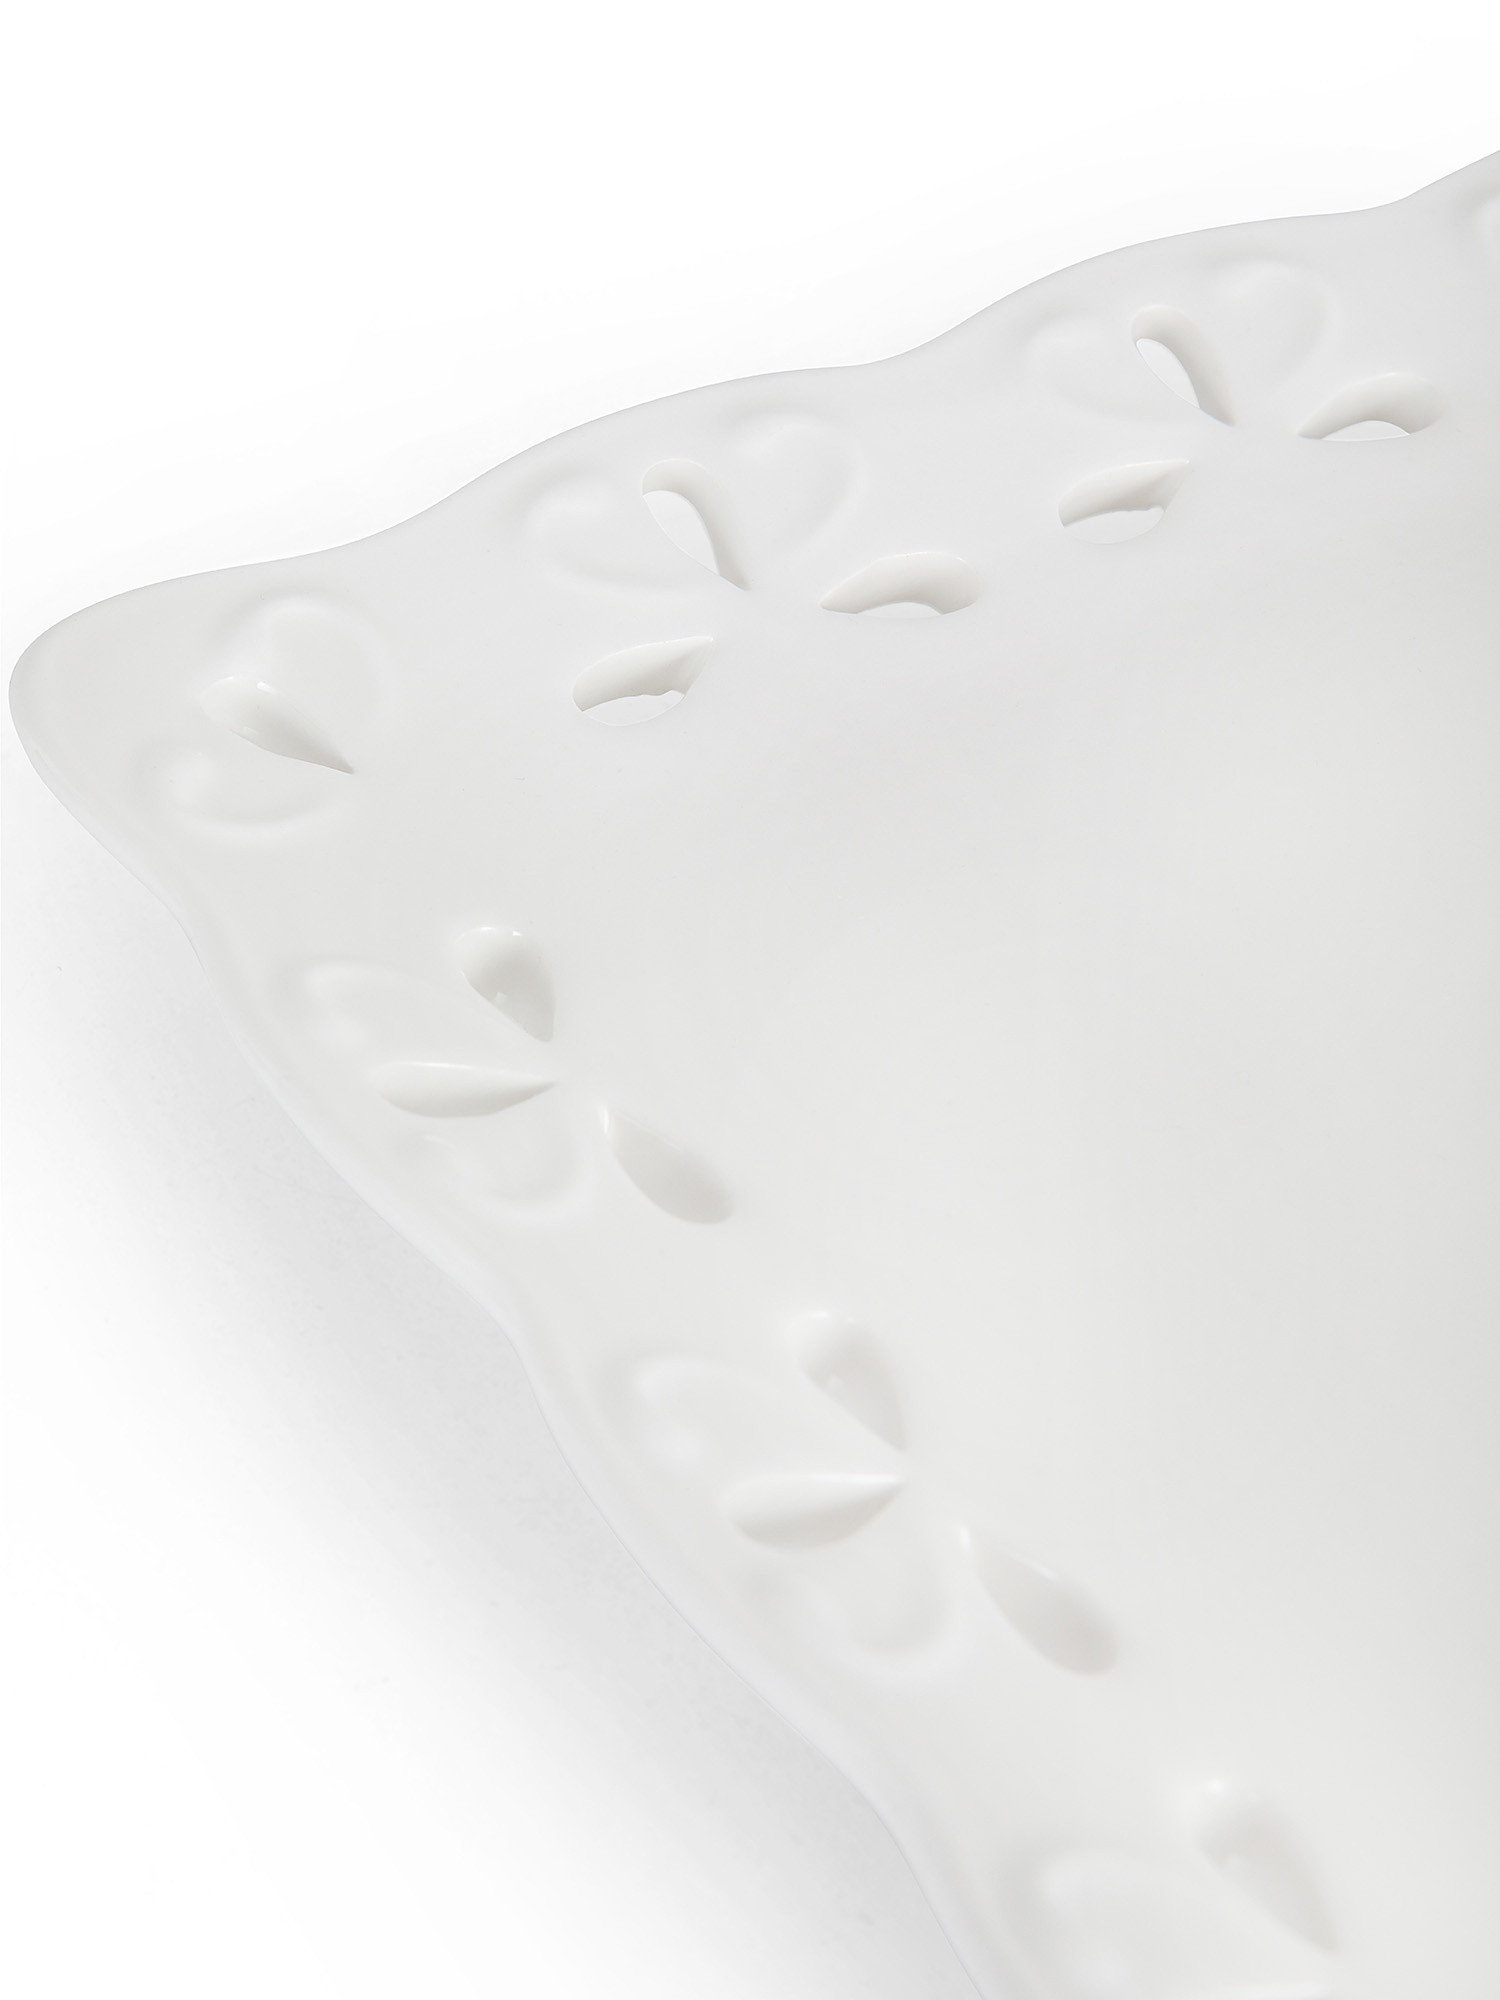 Ceramic tray with perforated edge, White, large image number 1